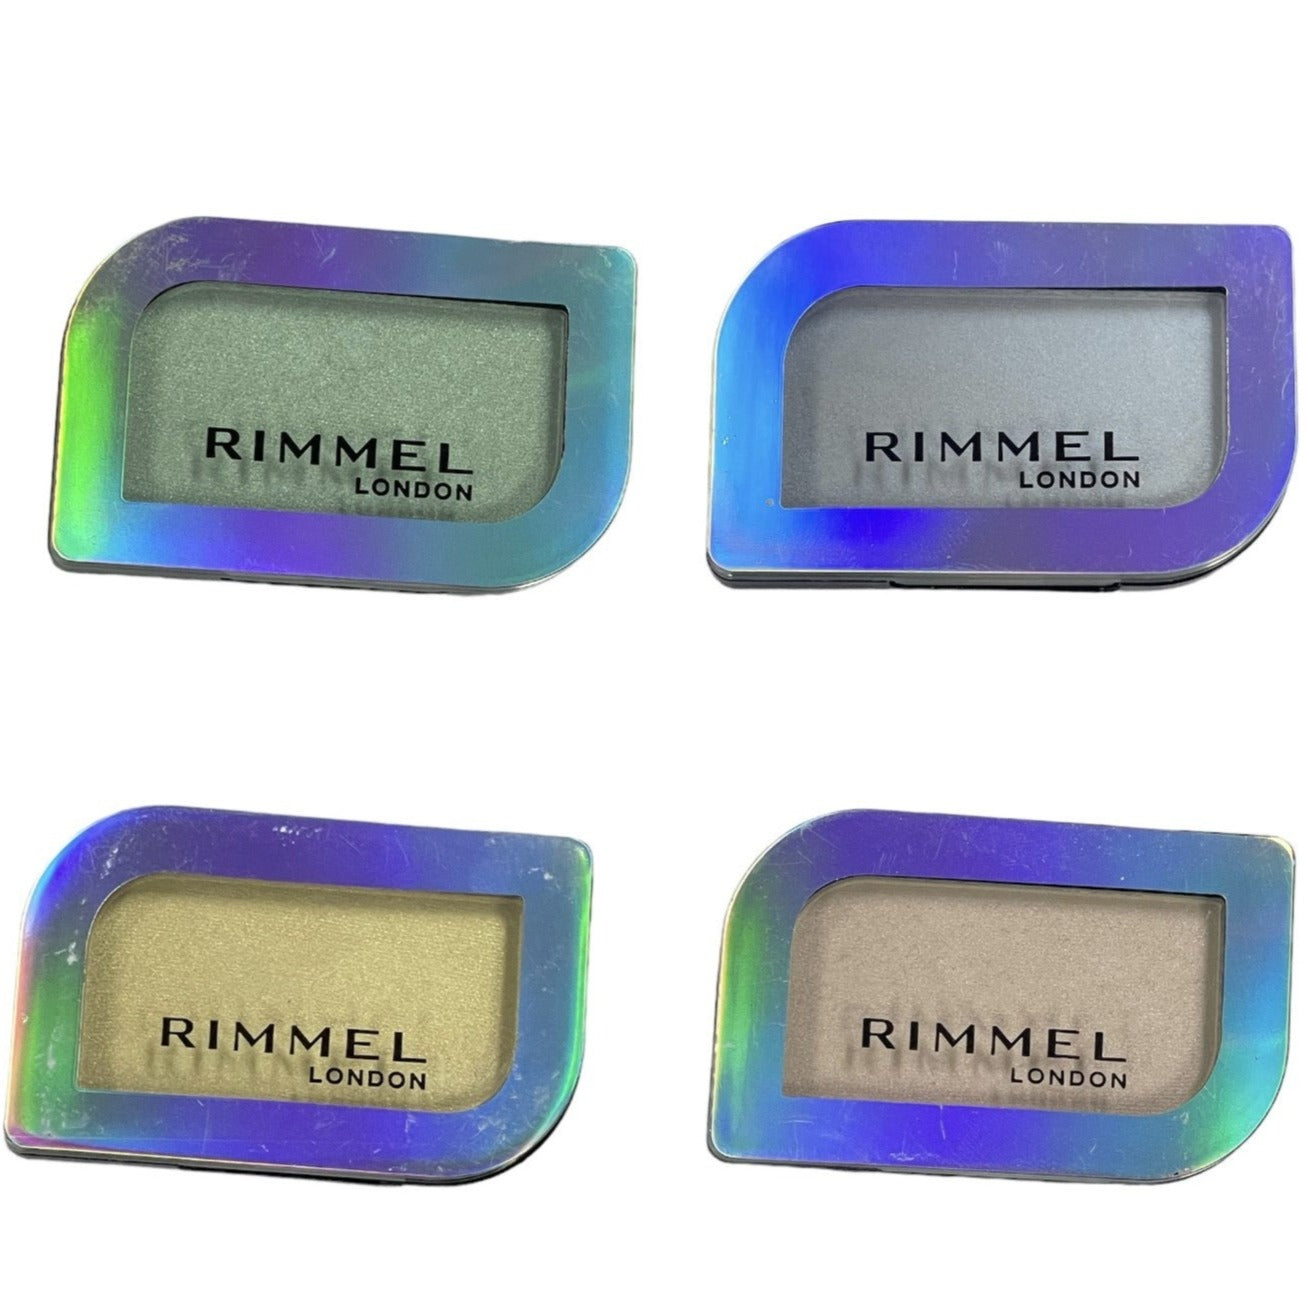 Shelf Pull Makeup - Rimmel Magnif'Eyes Holographic Eye Shadow & Face Highlighter, 4 Shades - 40 Units wholesale cosmetics liquidation surplus overstock hba